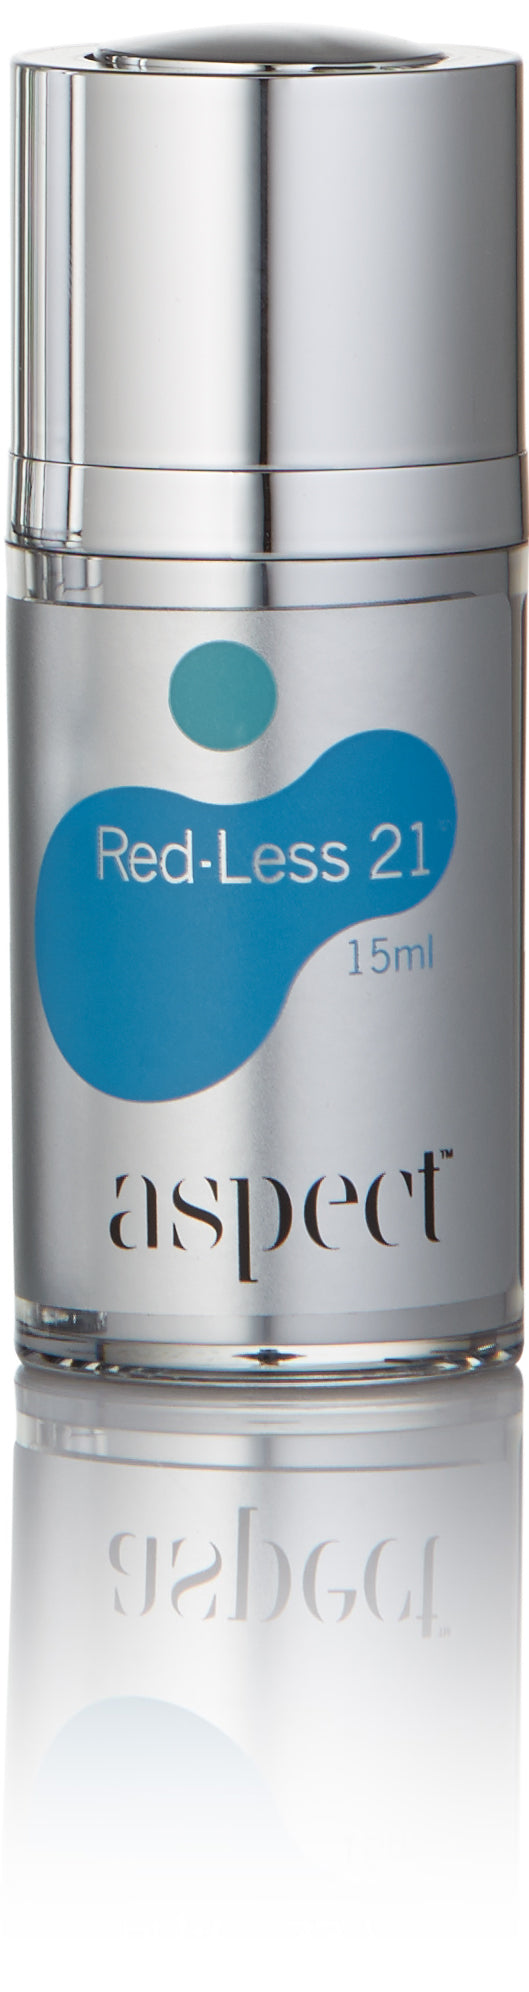 Red-Less 21 15ml